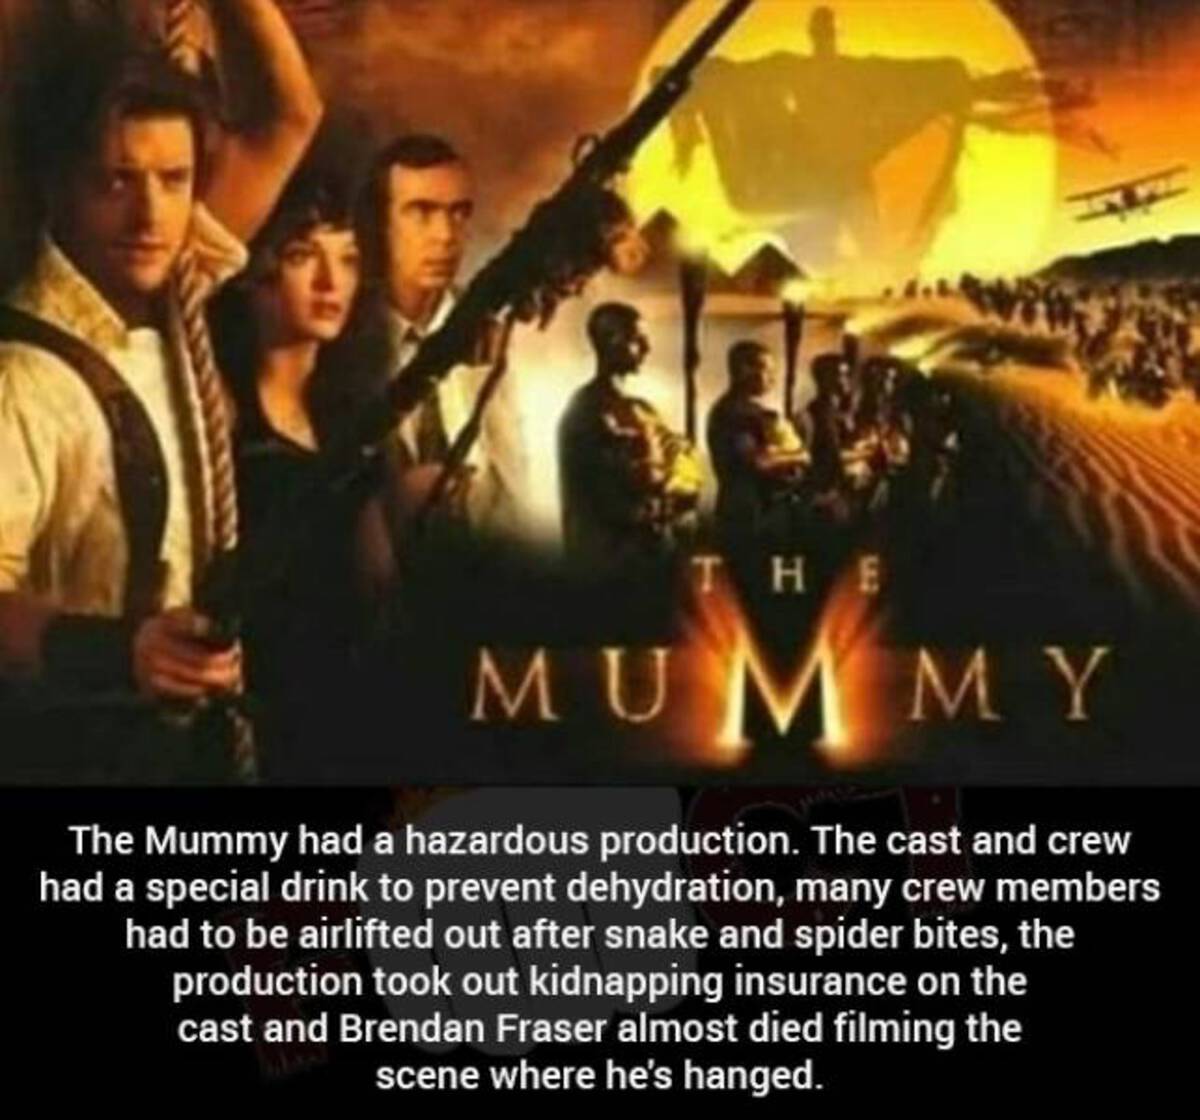 mummy movie poster - The Mummy The Mummy had a hazardous production. The cast and crew had a special drink to prevent dehydration, many crew members had to be airlifted out after snake and spider bites, the production took out kidnapping insurance on the 